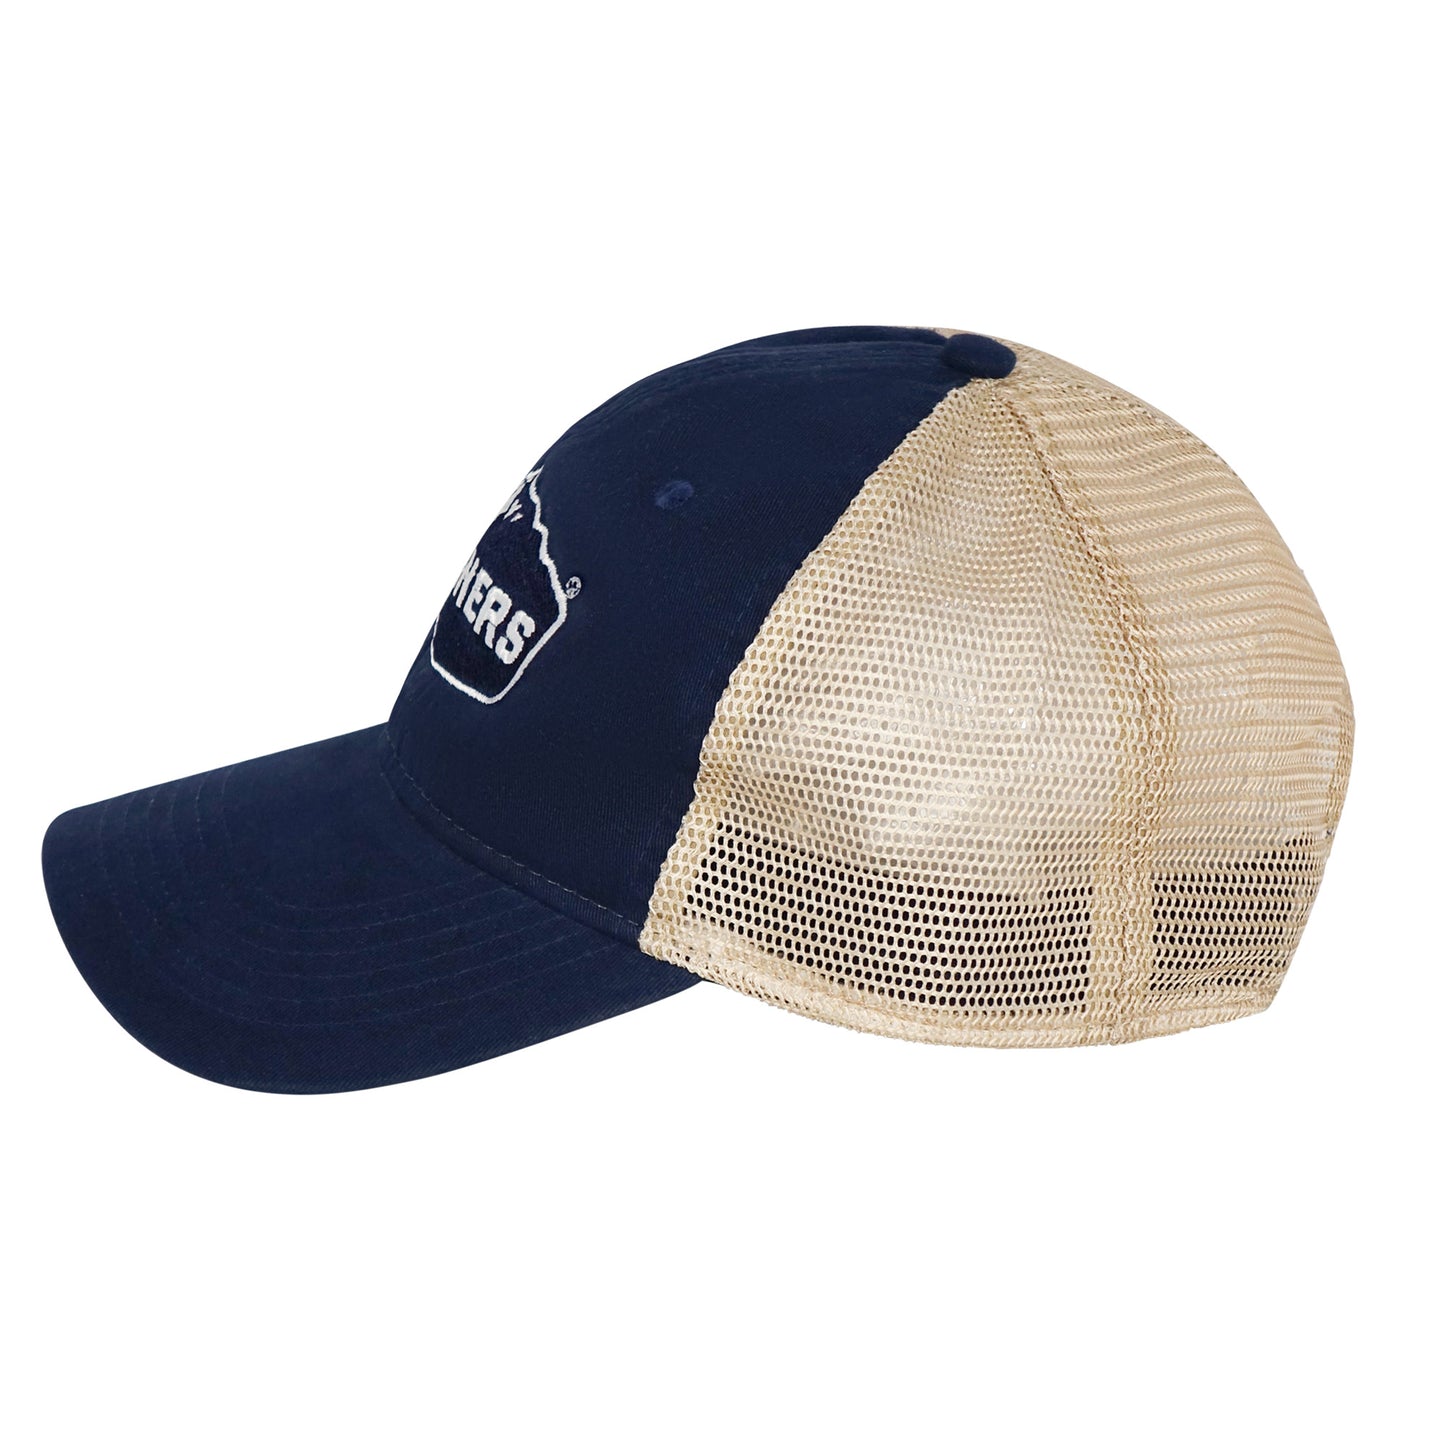 A blue and tan low-profile Mainers ball cap.